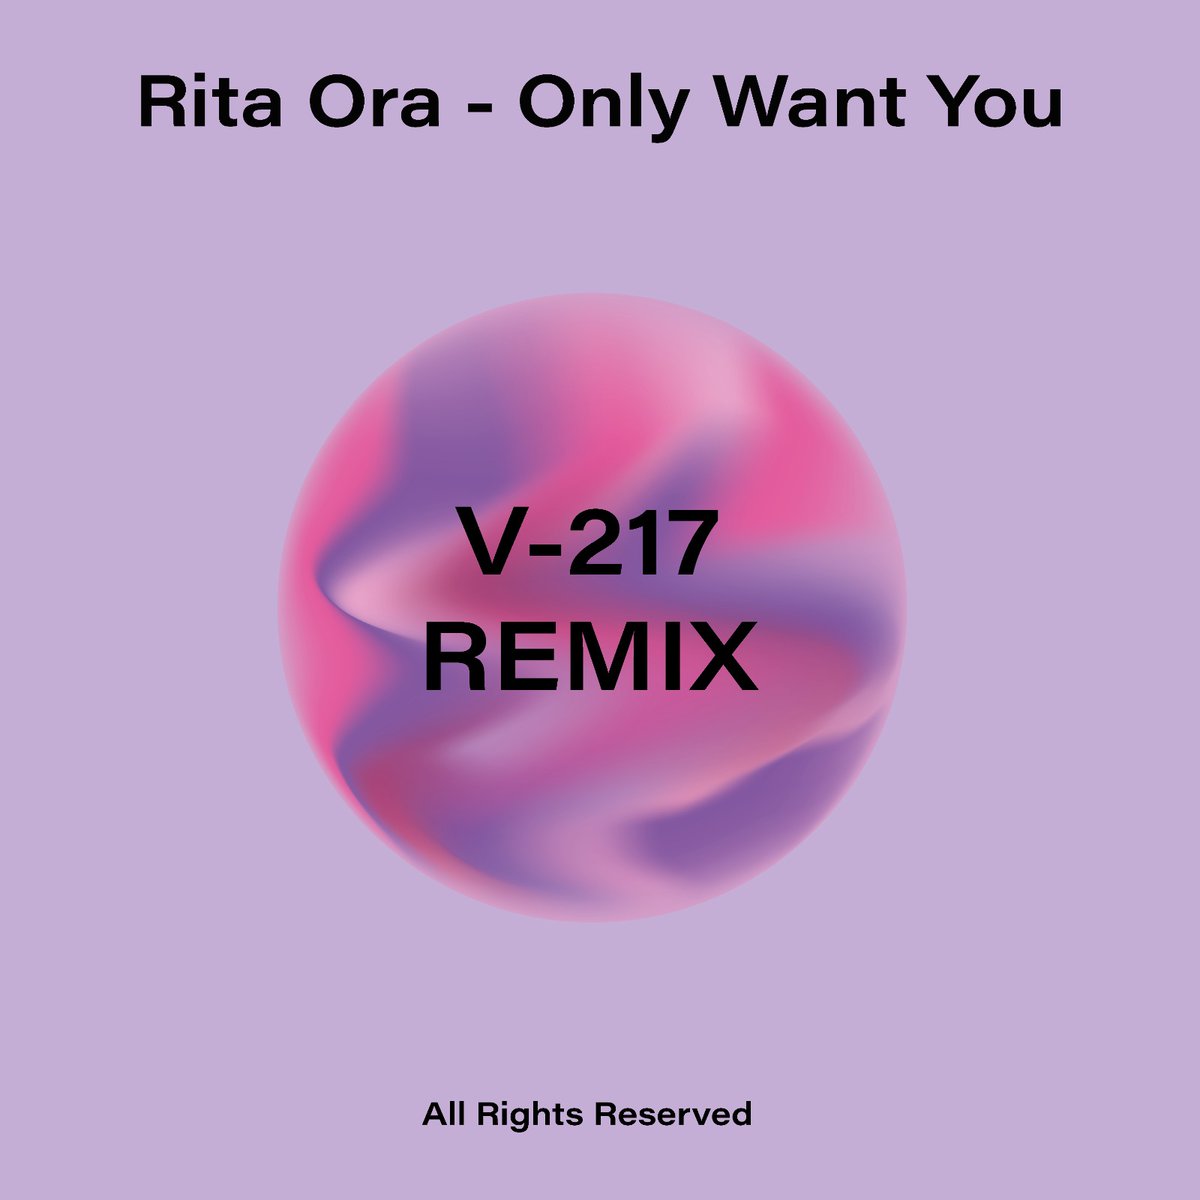 My remix of Rita Ora - Only Want You will be out in two weeks! Can't wait to share with you all this one! 💚💚💚

#IIIVII #RitaOra #OnlyWantYou #remix #newmusic #onlygoodvibes #goodvibes #newremix #newsong